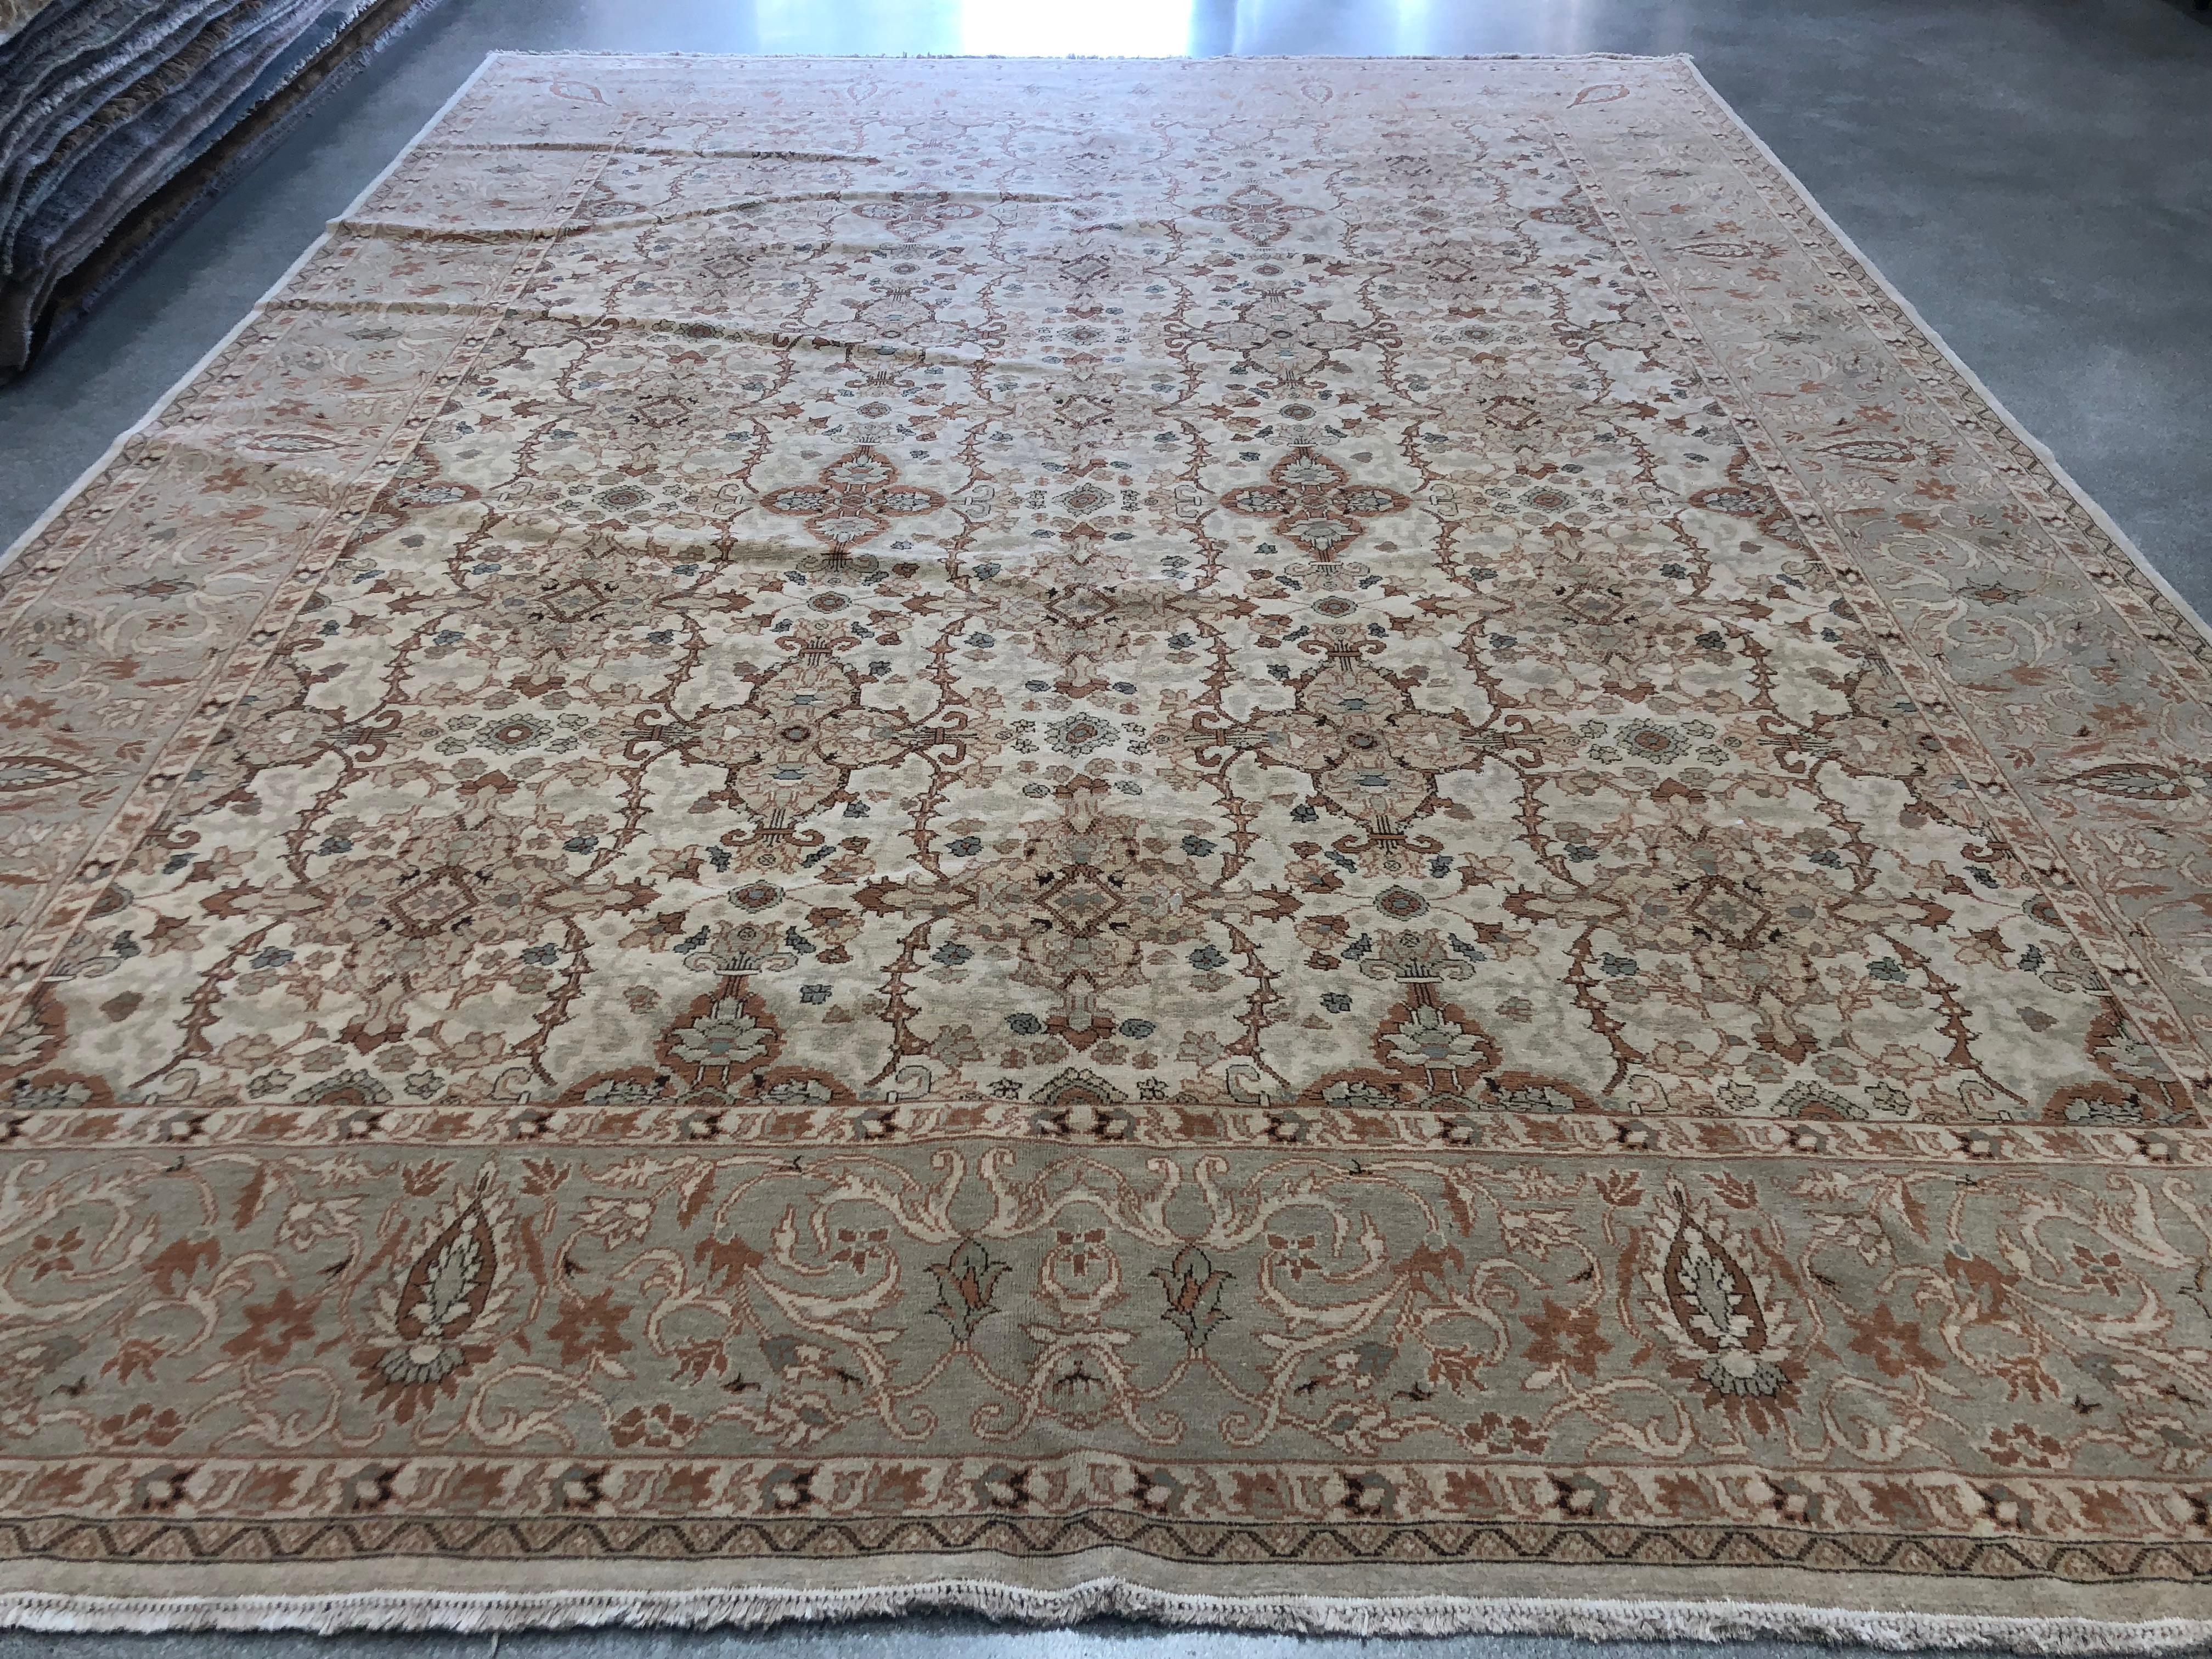 Two design motifs blend together seamlessly in this elegant traditional-style wool area rug from the European Design collection. The large center panel features a jeweled pattern of brown, gold and teal tones against an ivory/beige background while